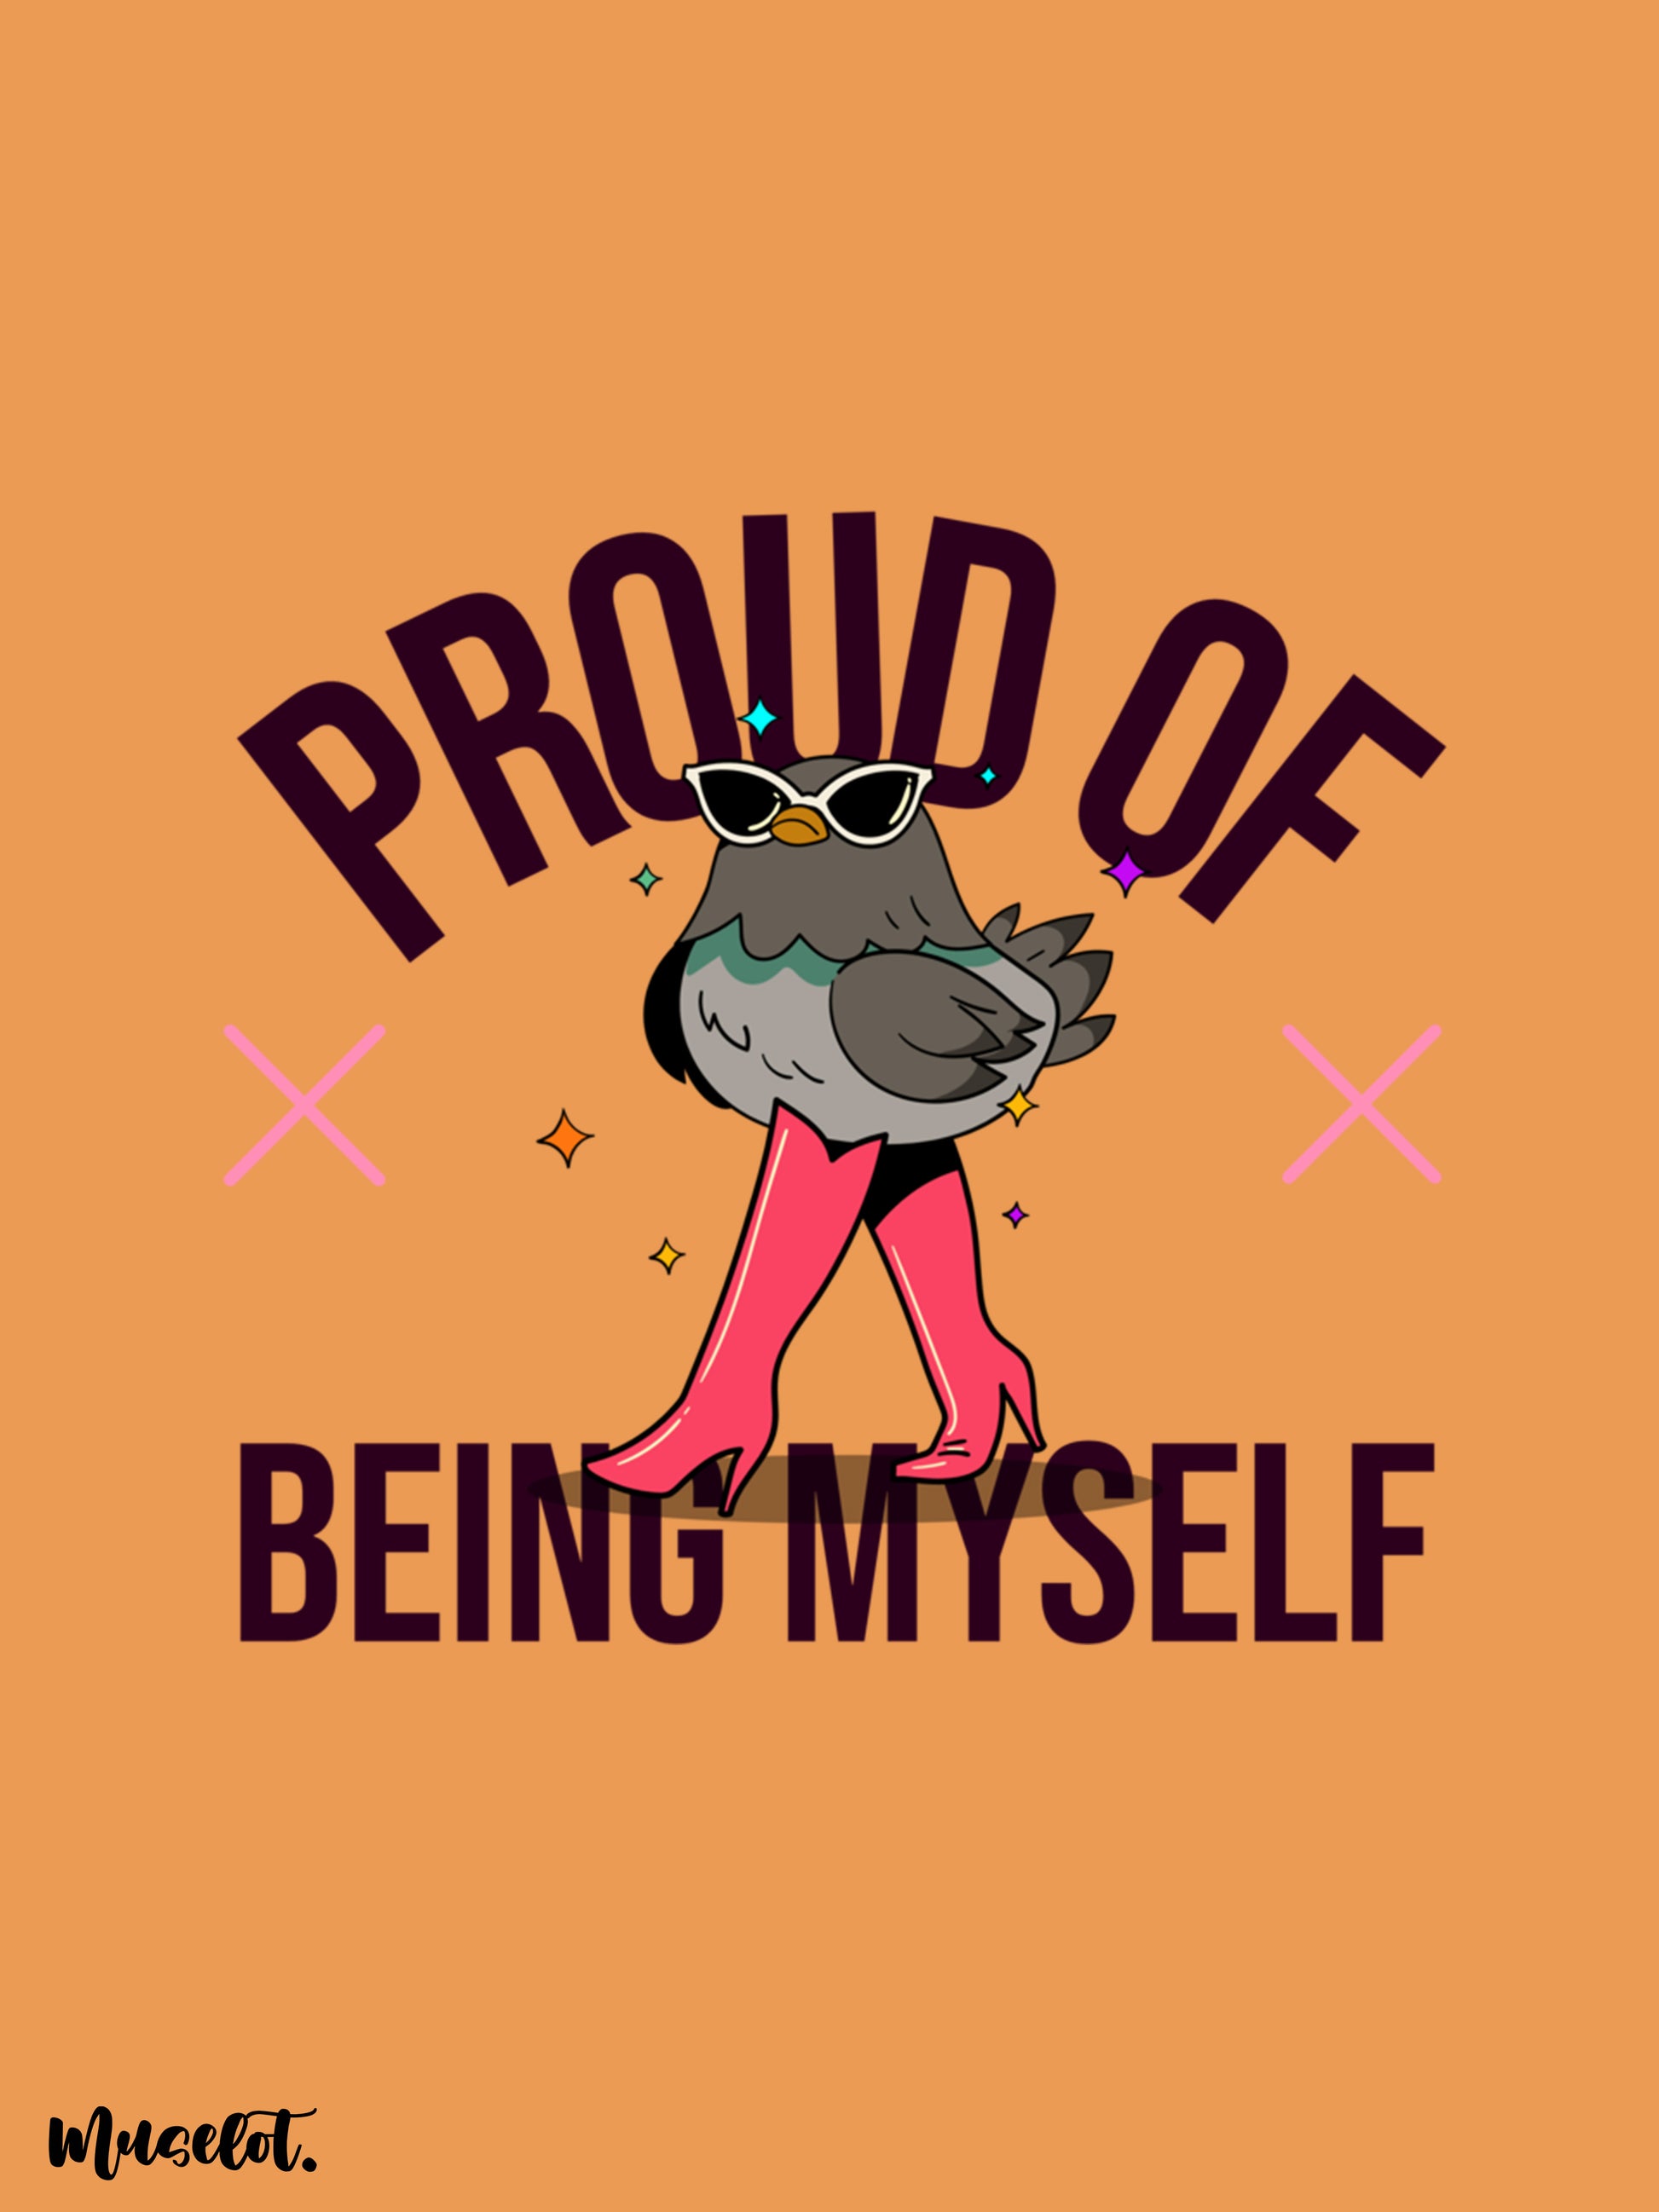 Proud of being myself design illustration for LGBTQ+ pride community at Muselot